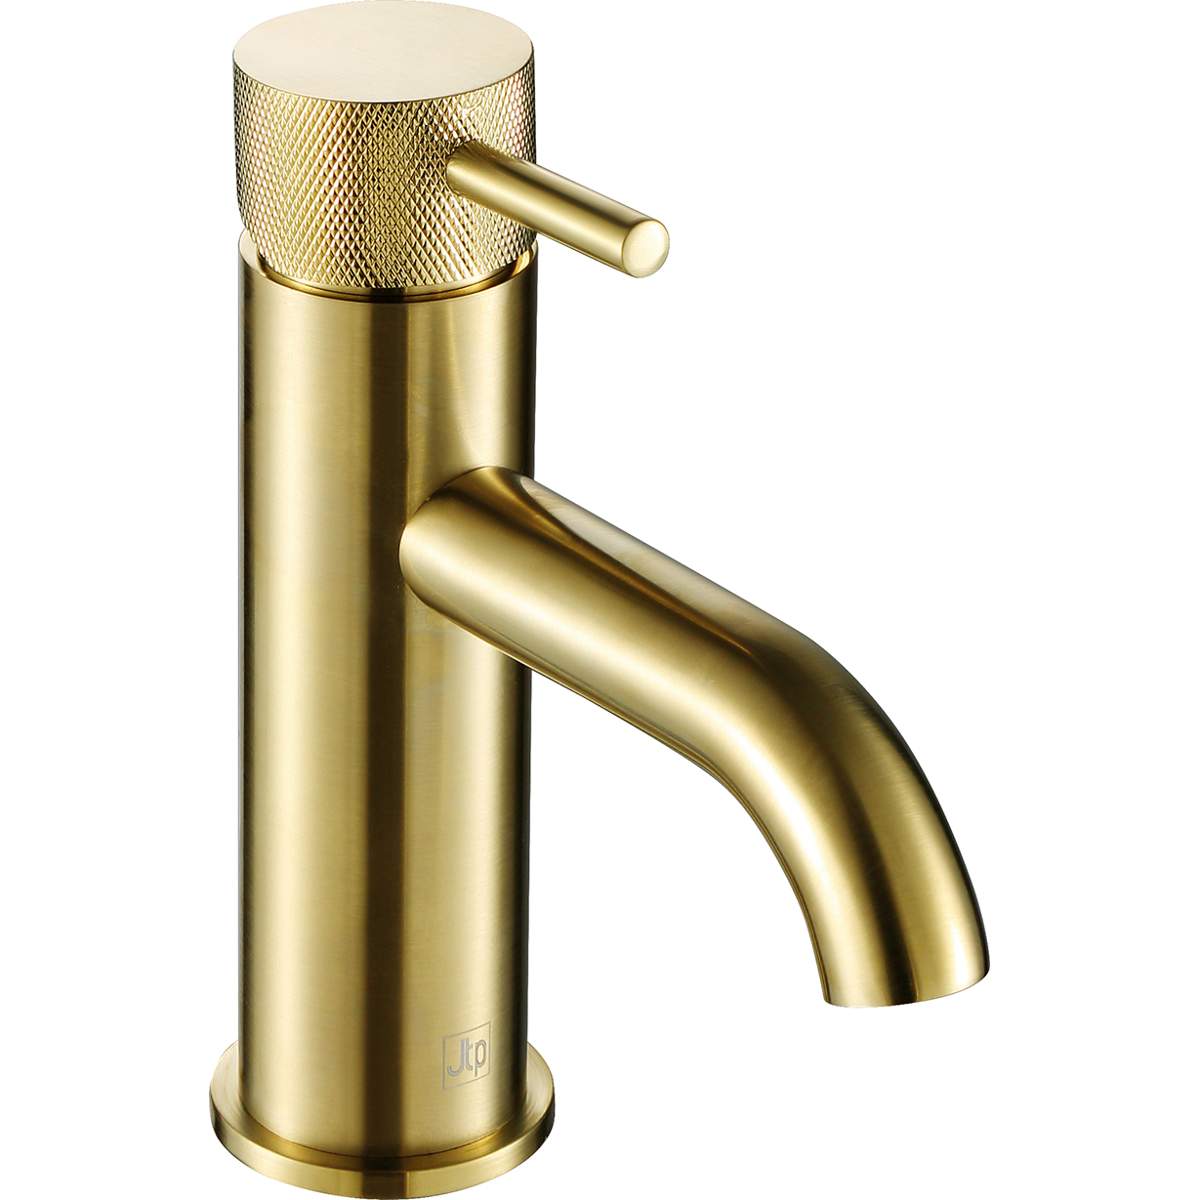 JTP Vos Brushed Brass Single Lever Basin Mixer with Designer Handle (DH23008ABBR)